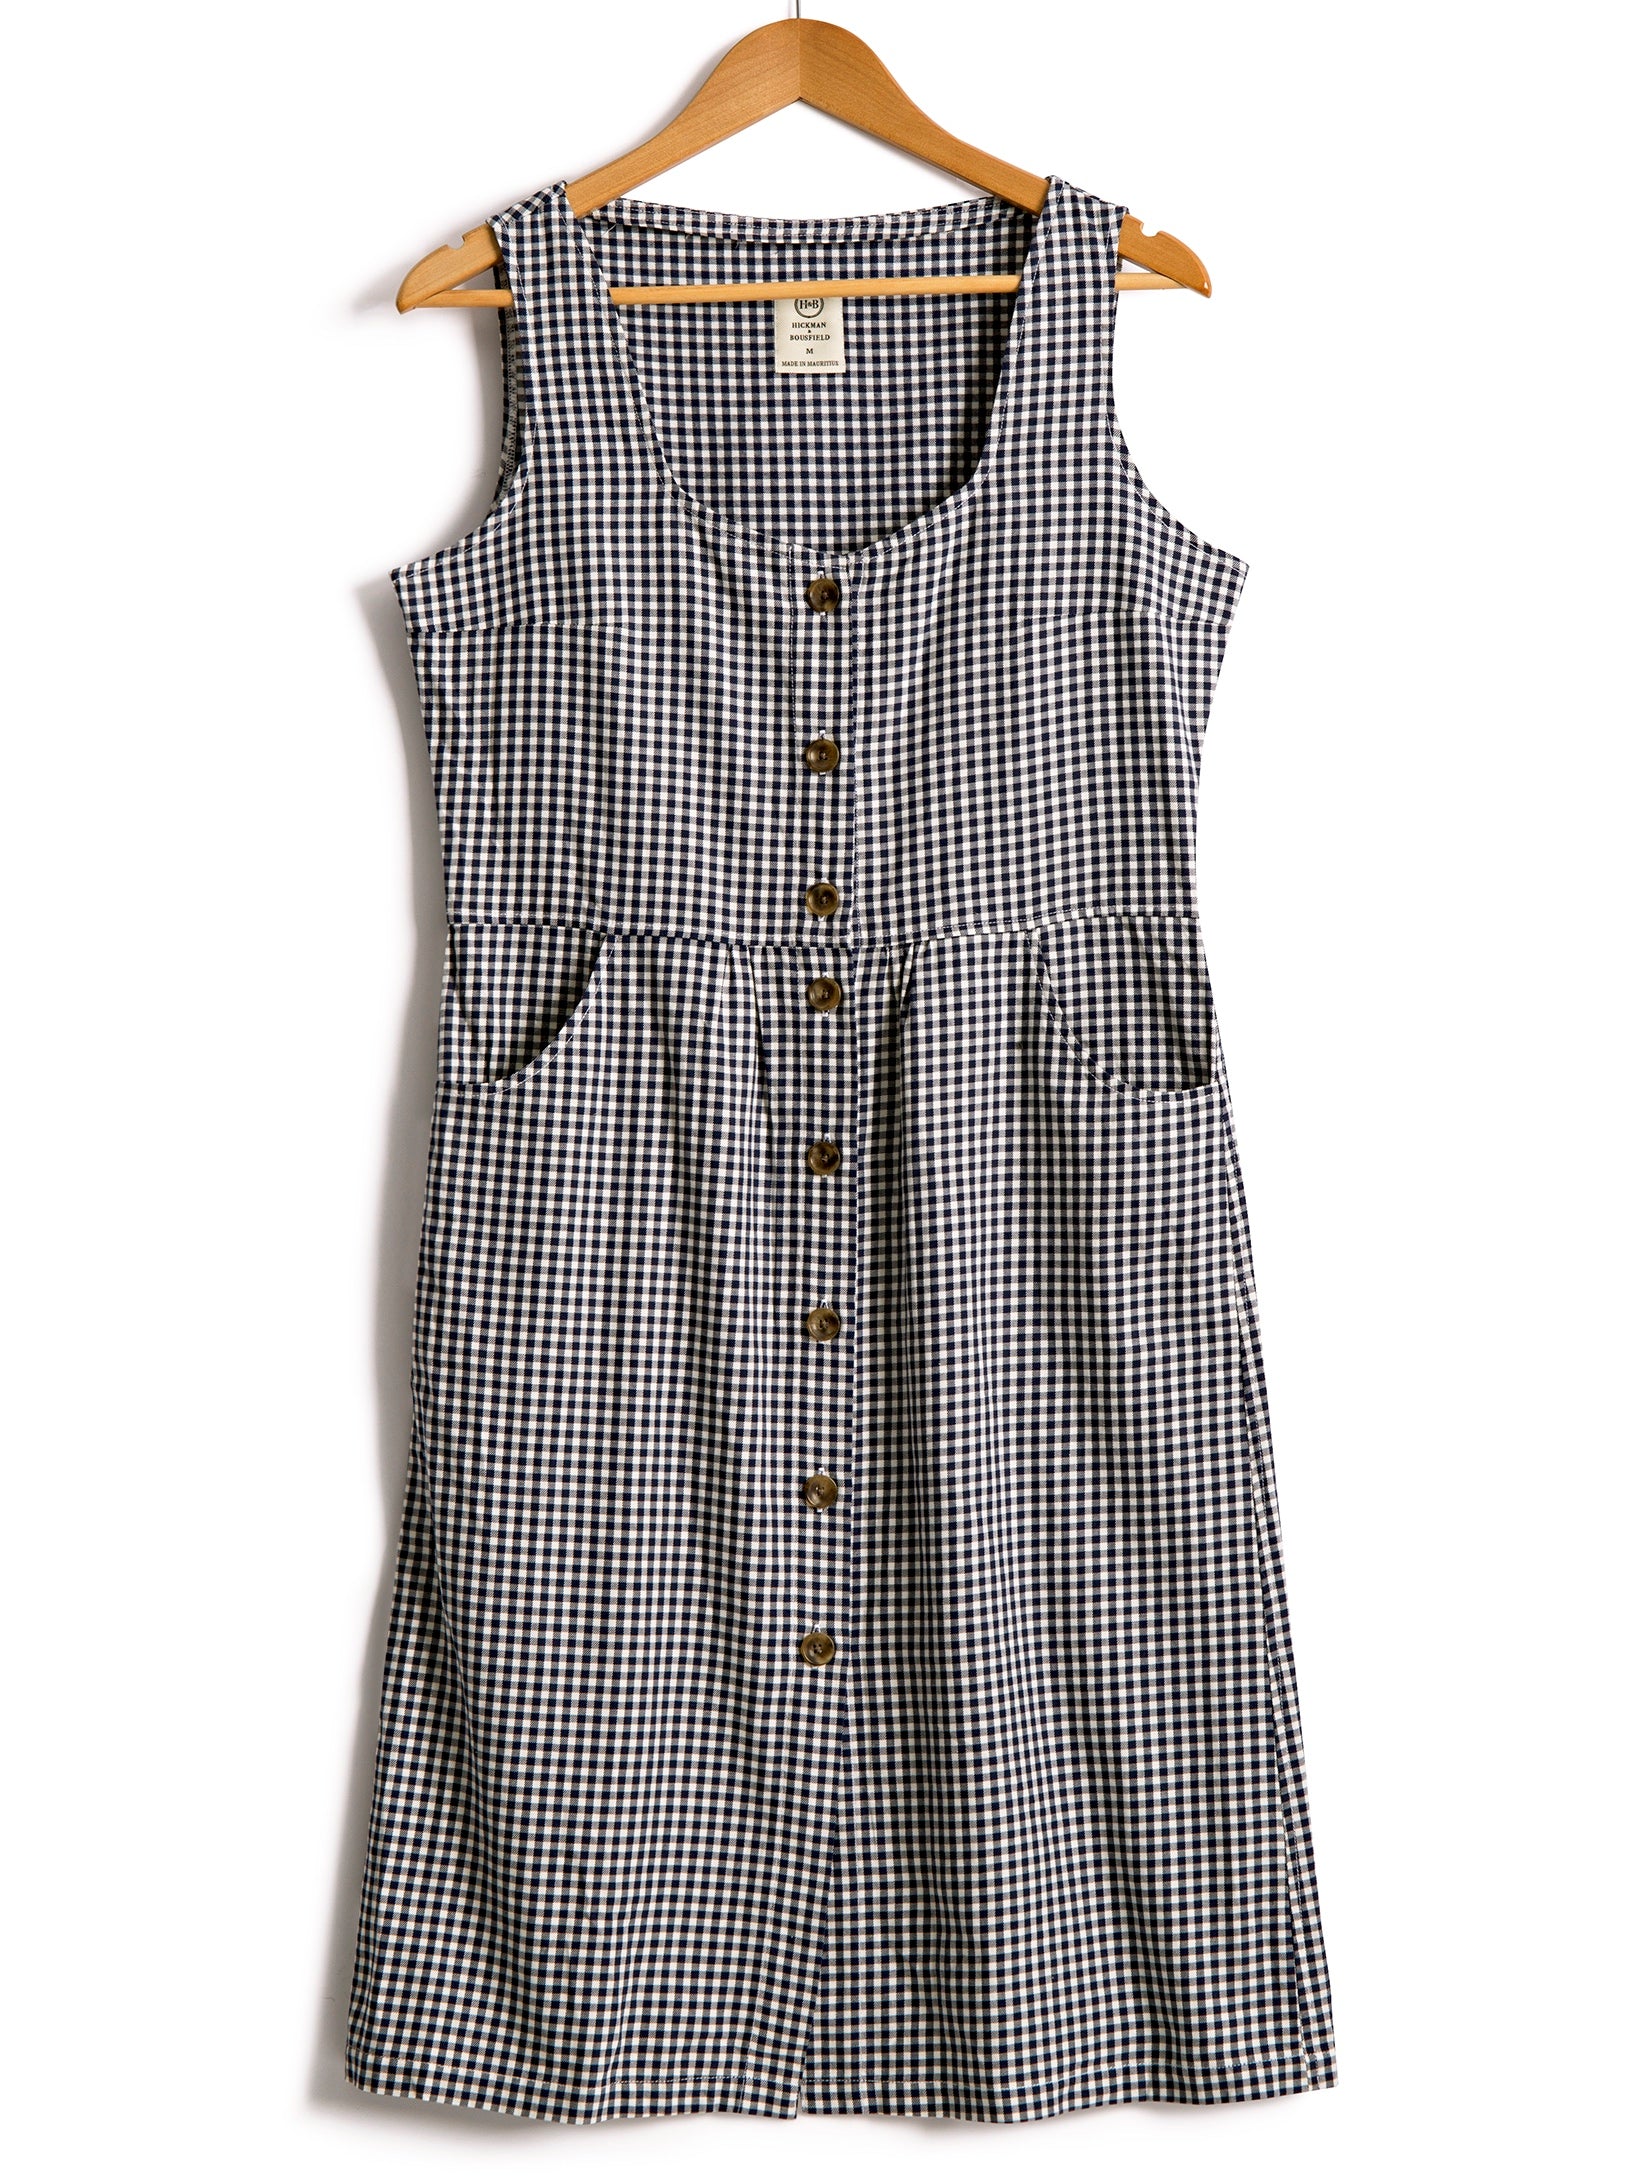 Sundress in Gingham Cotton, Dress, Hickman & Bousfield - Hickman & Bousfield, Safari and Travel Clothing